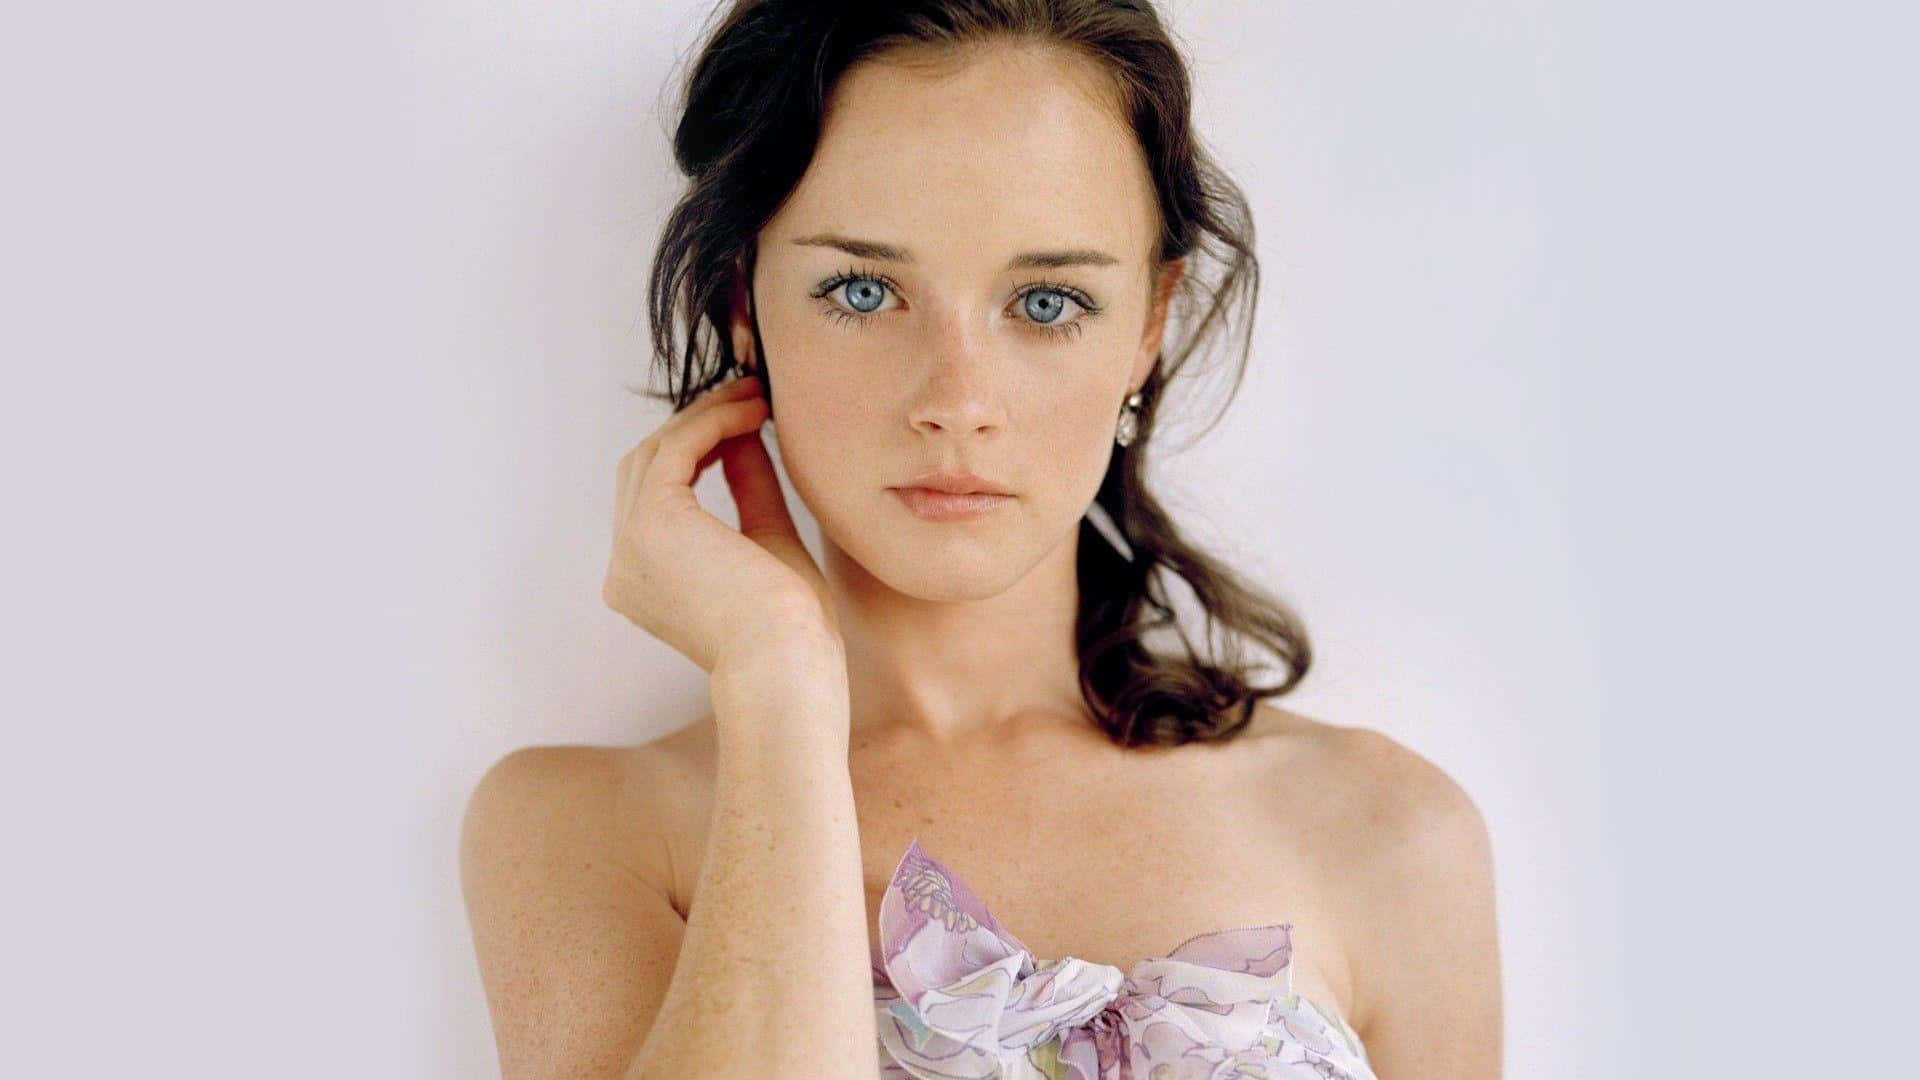 Alexis Bledel posing for a photoshoot Wallpaper